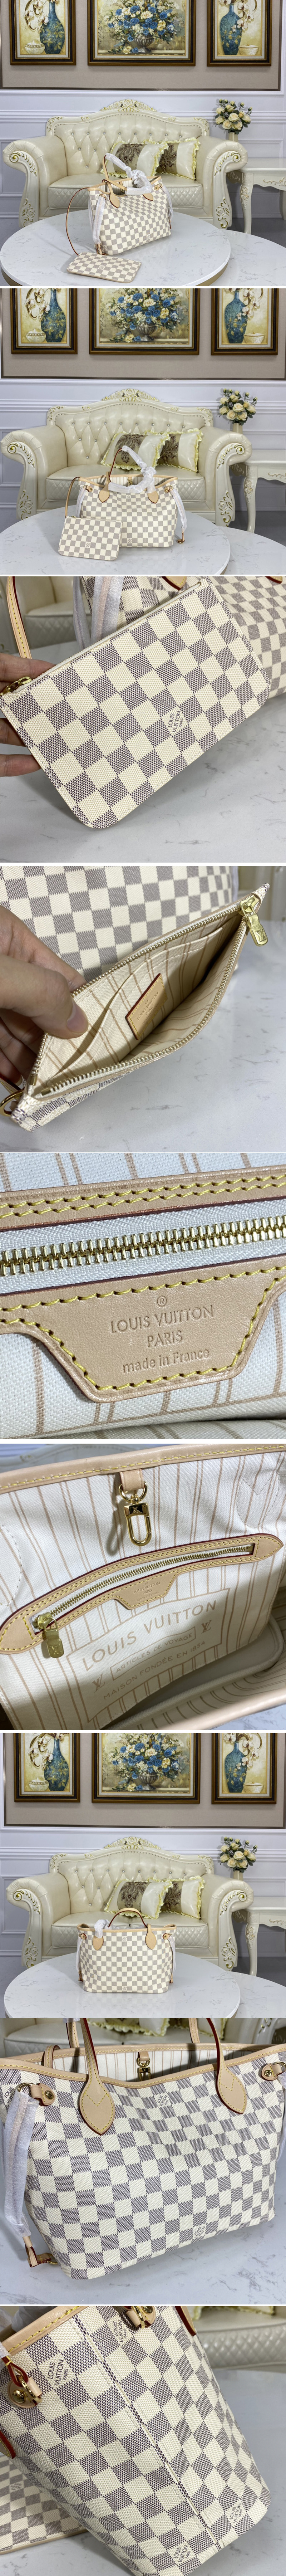 Replica Louis Vuitton N41362 LV Neverfull PM tote Bag in Damier Azur coated canvas